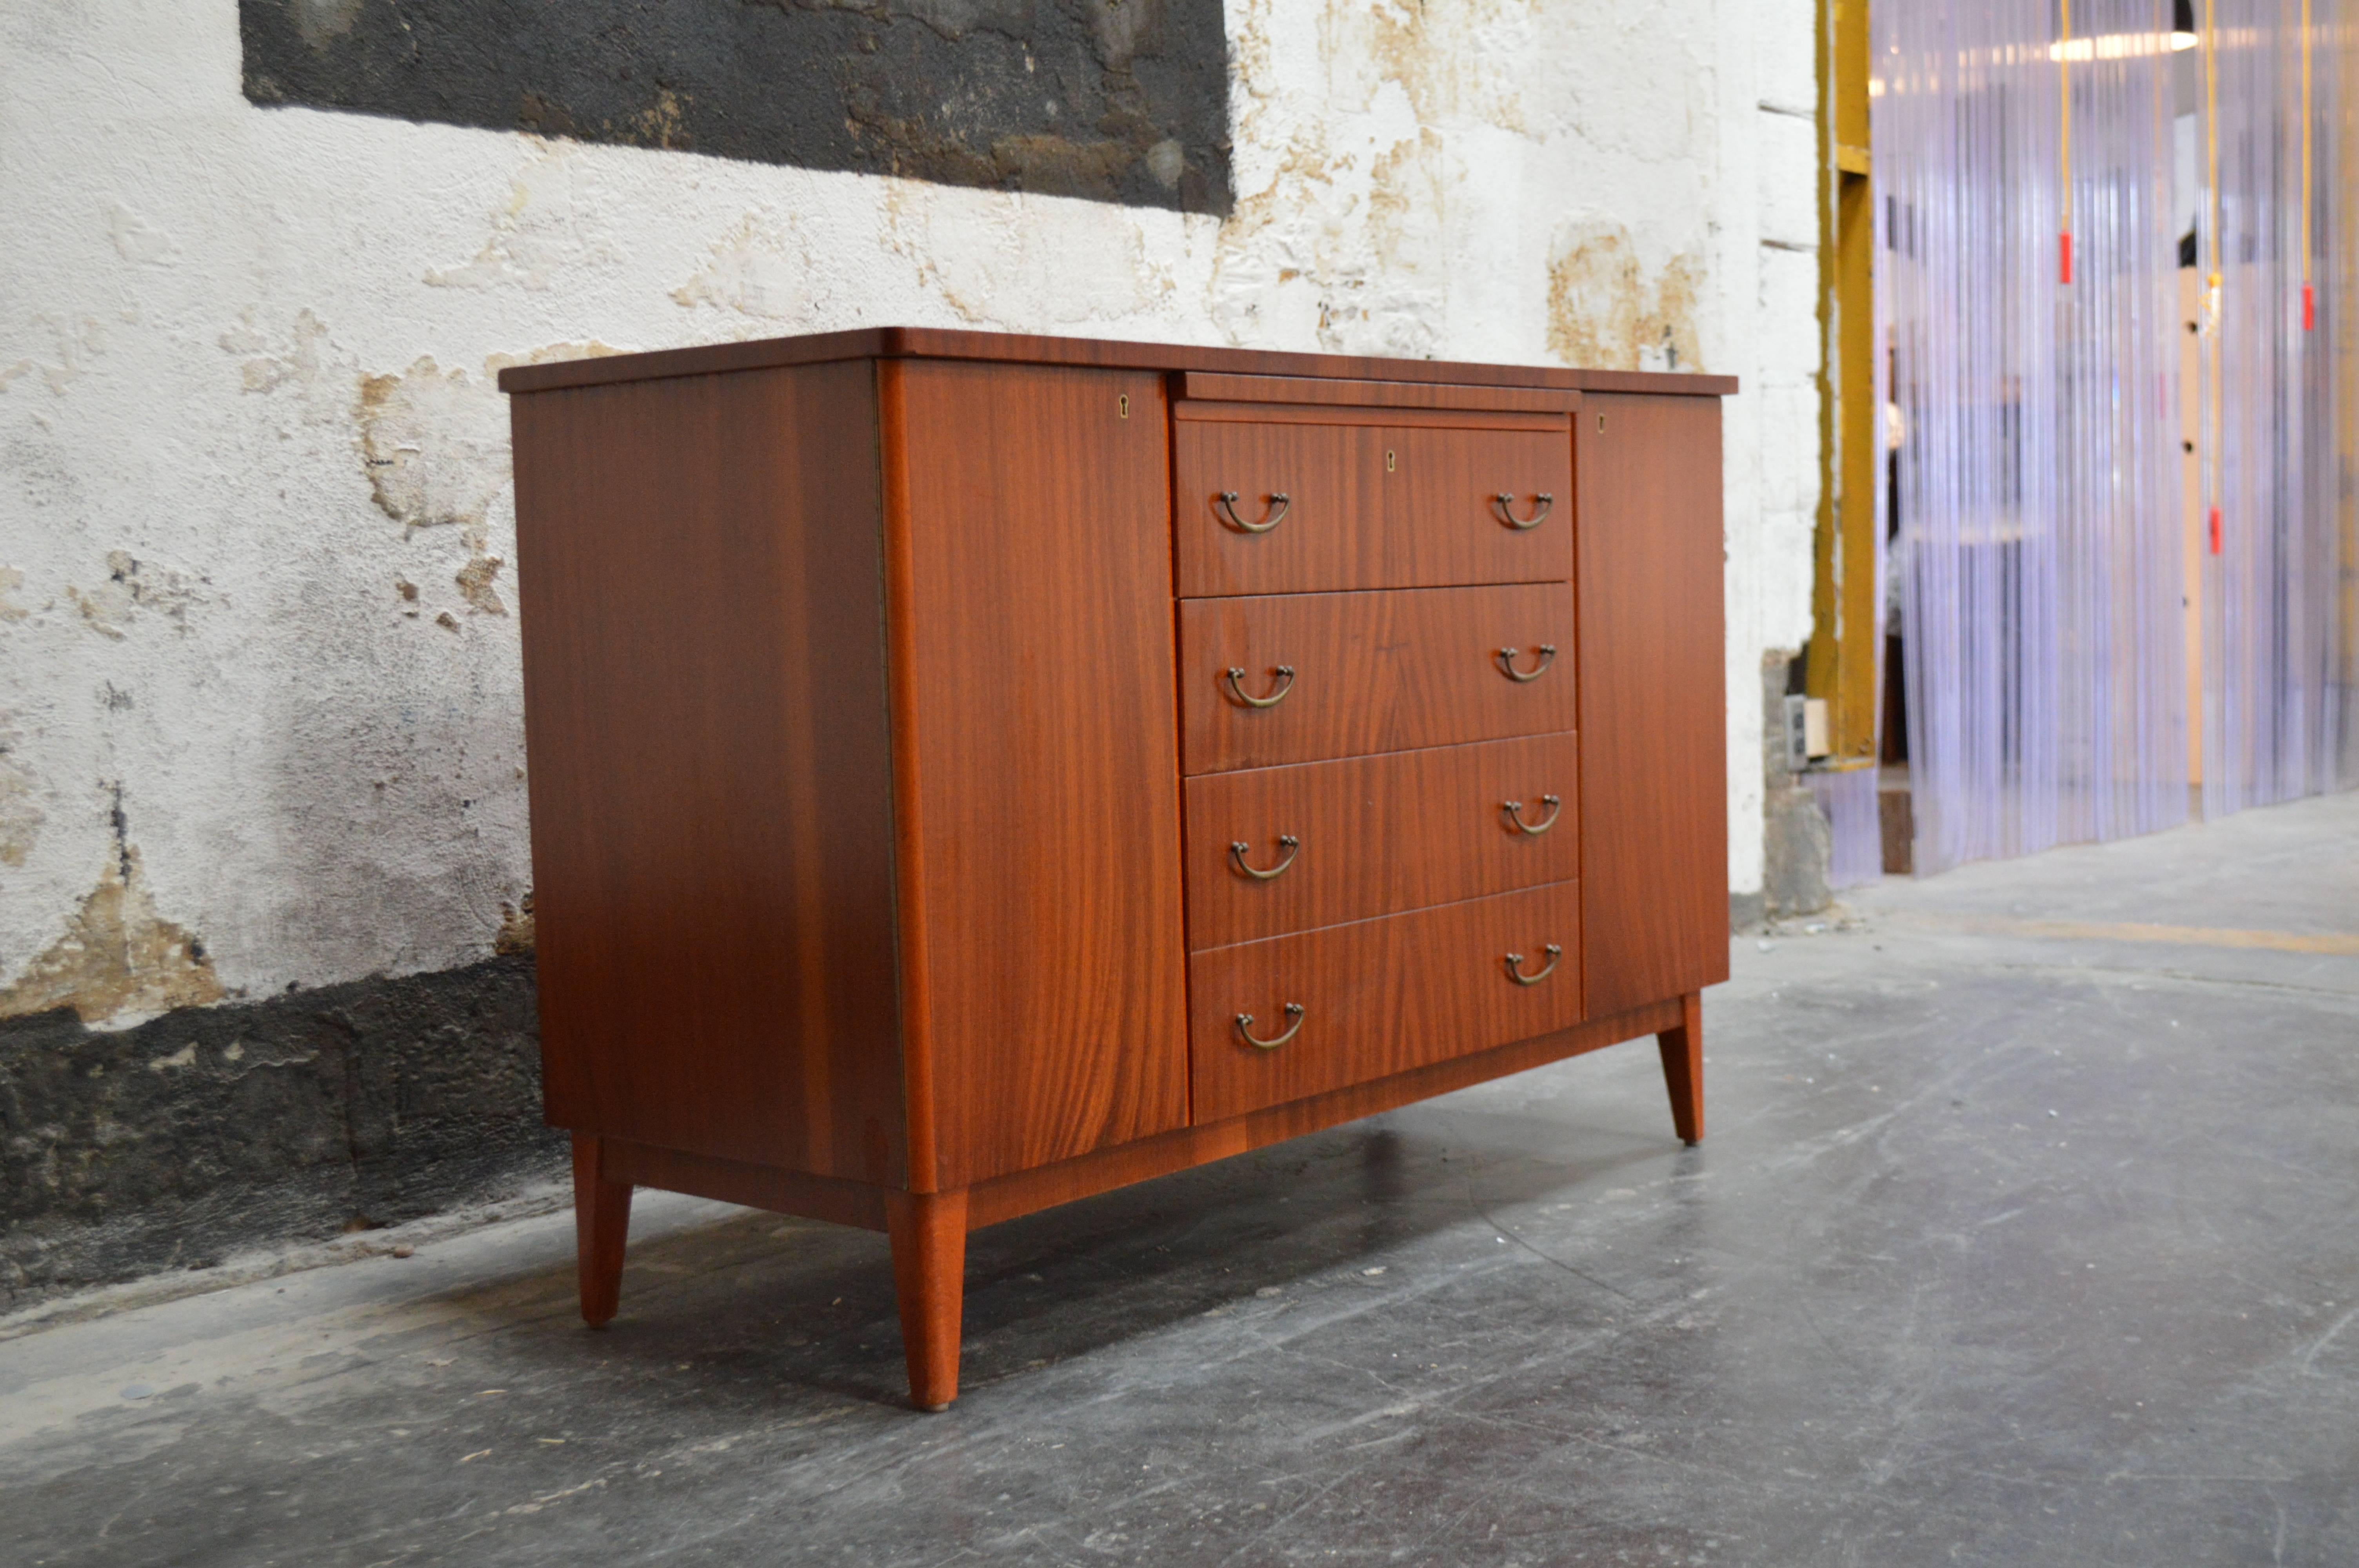 Crafted in ribbon mahogany, this chest/cabinet features a shelf on the left side, five drawers on the right side and four generous drawers down the centre for storage. There is also a pull out shelf on the top for additional serving area. This piece